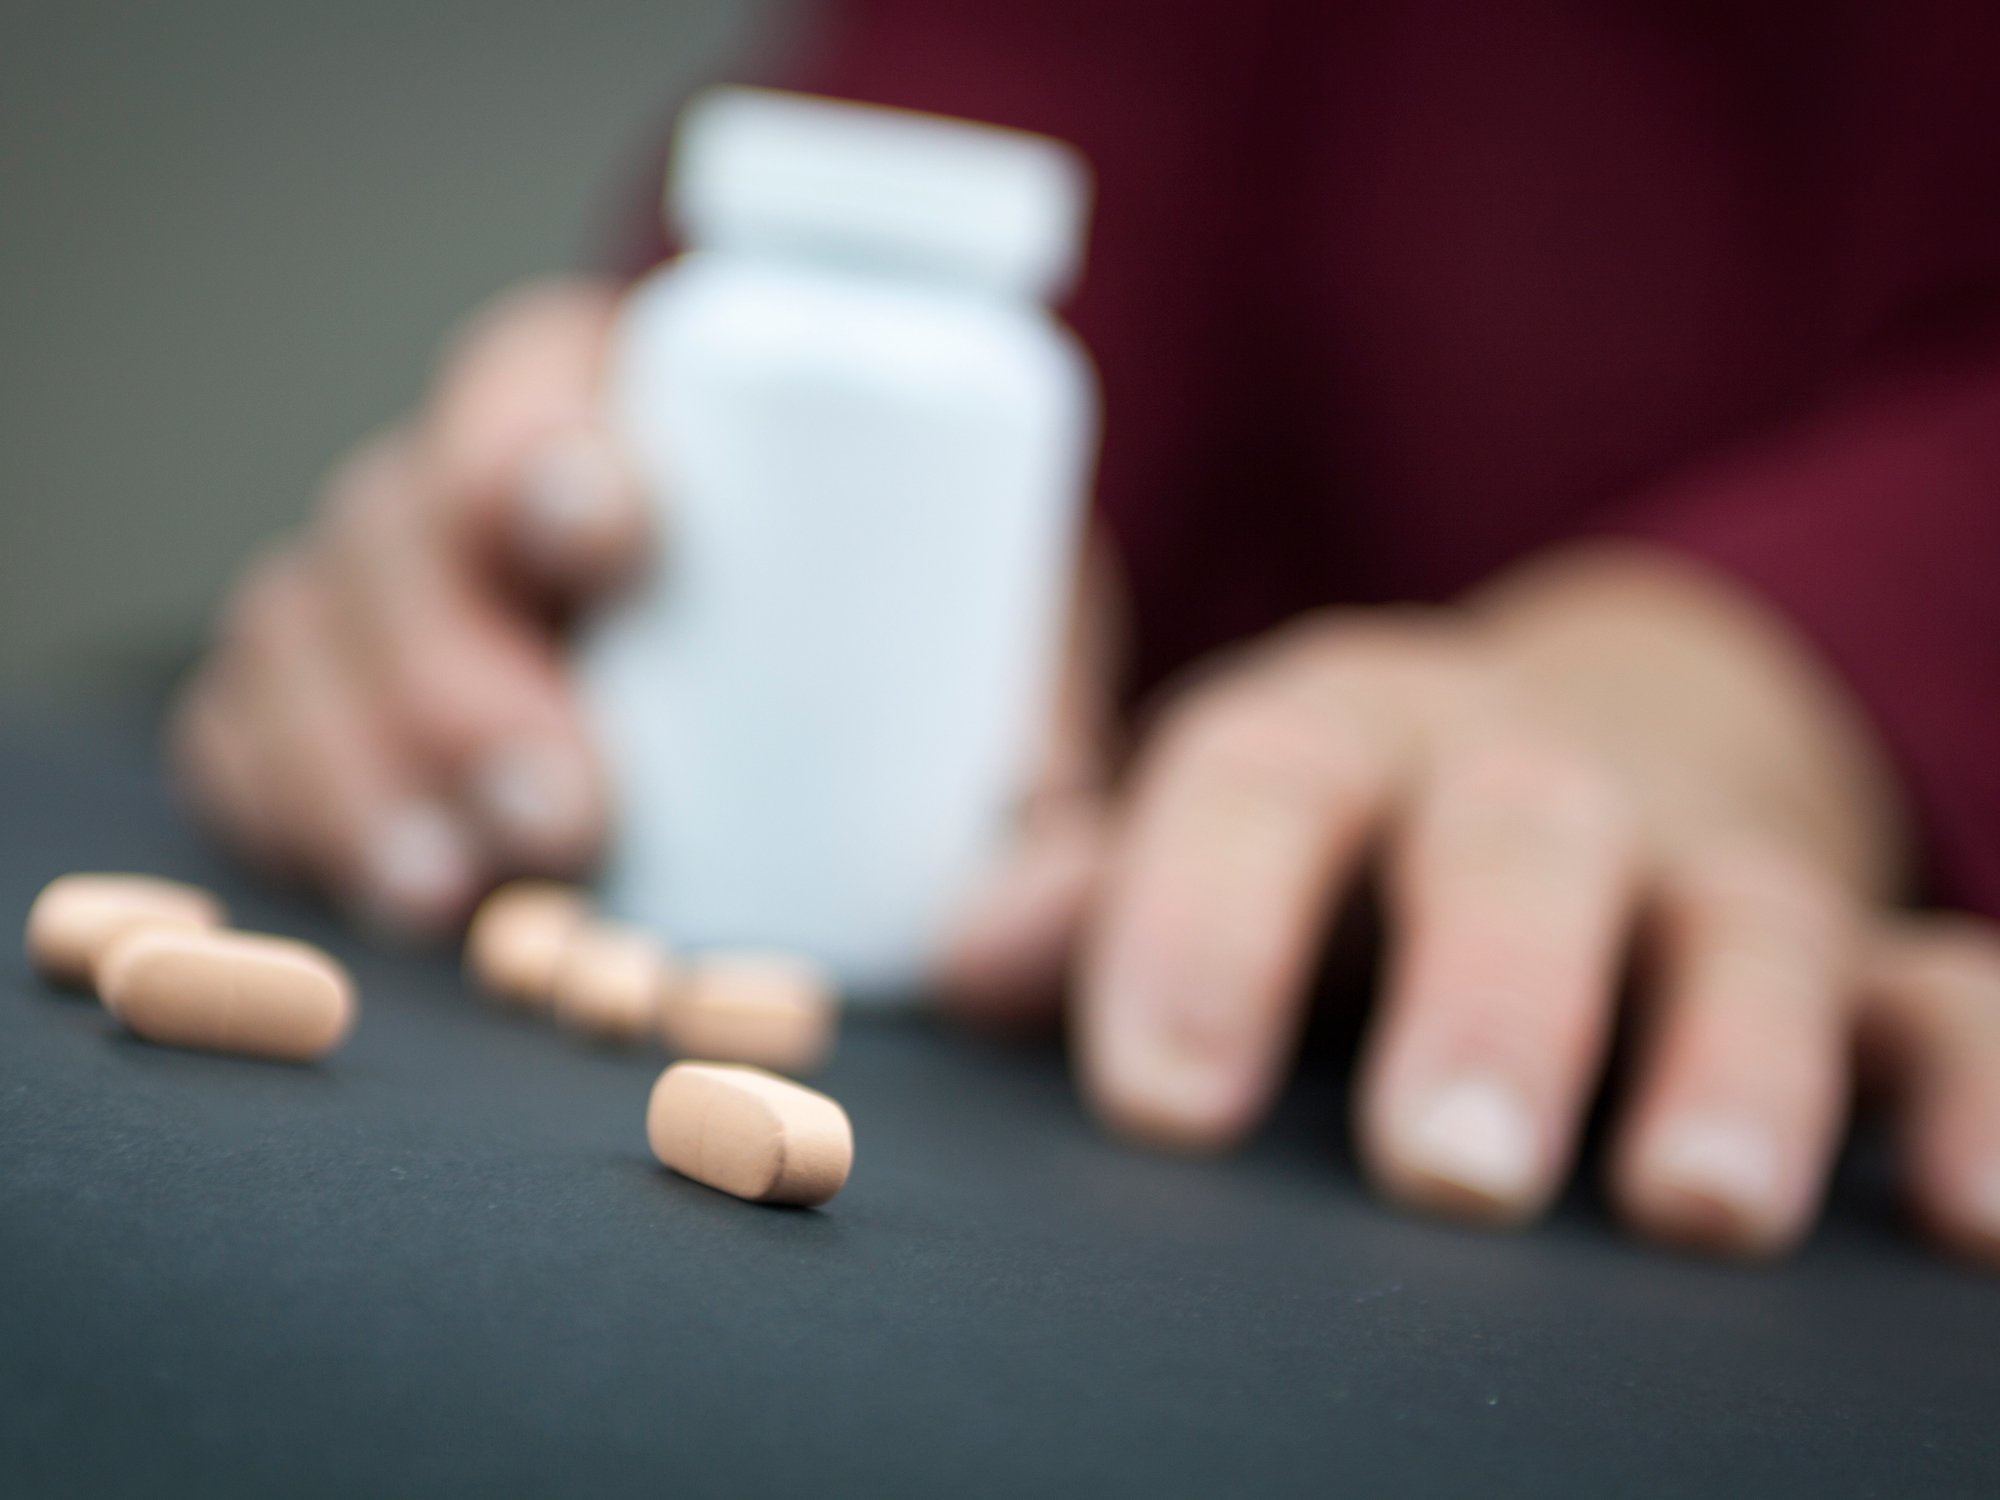 Don’t take the arthritis meds that lead to heart attack